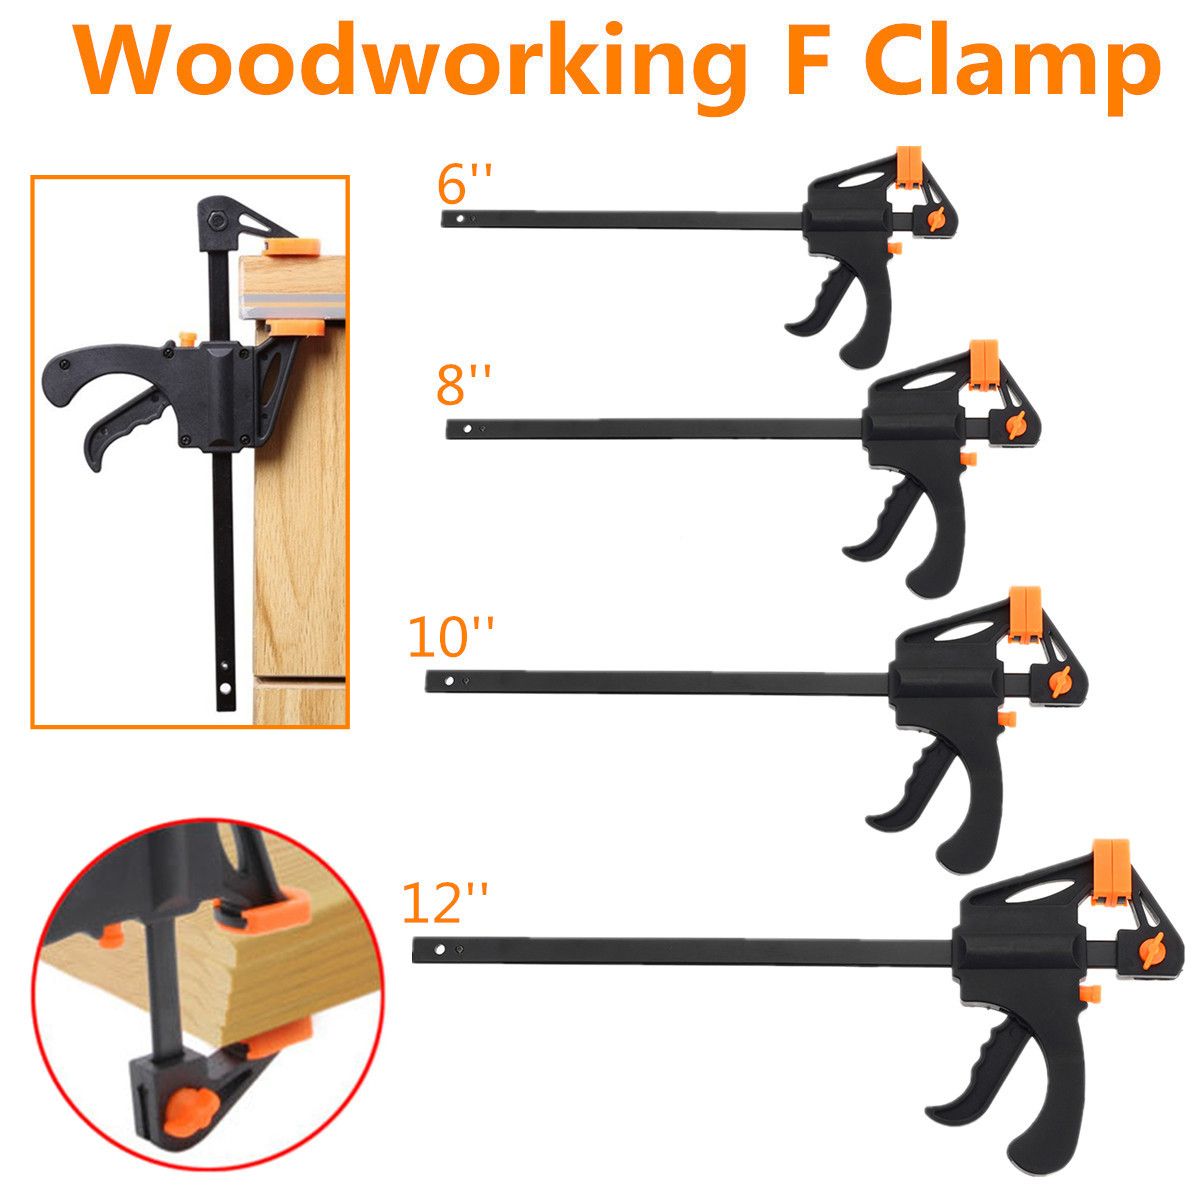 681012-Inch-Wood-Working-Bar-F-Clamp-Grip-Ratchet-Release-Squeeze-Hand-Tool-1243566